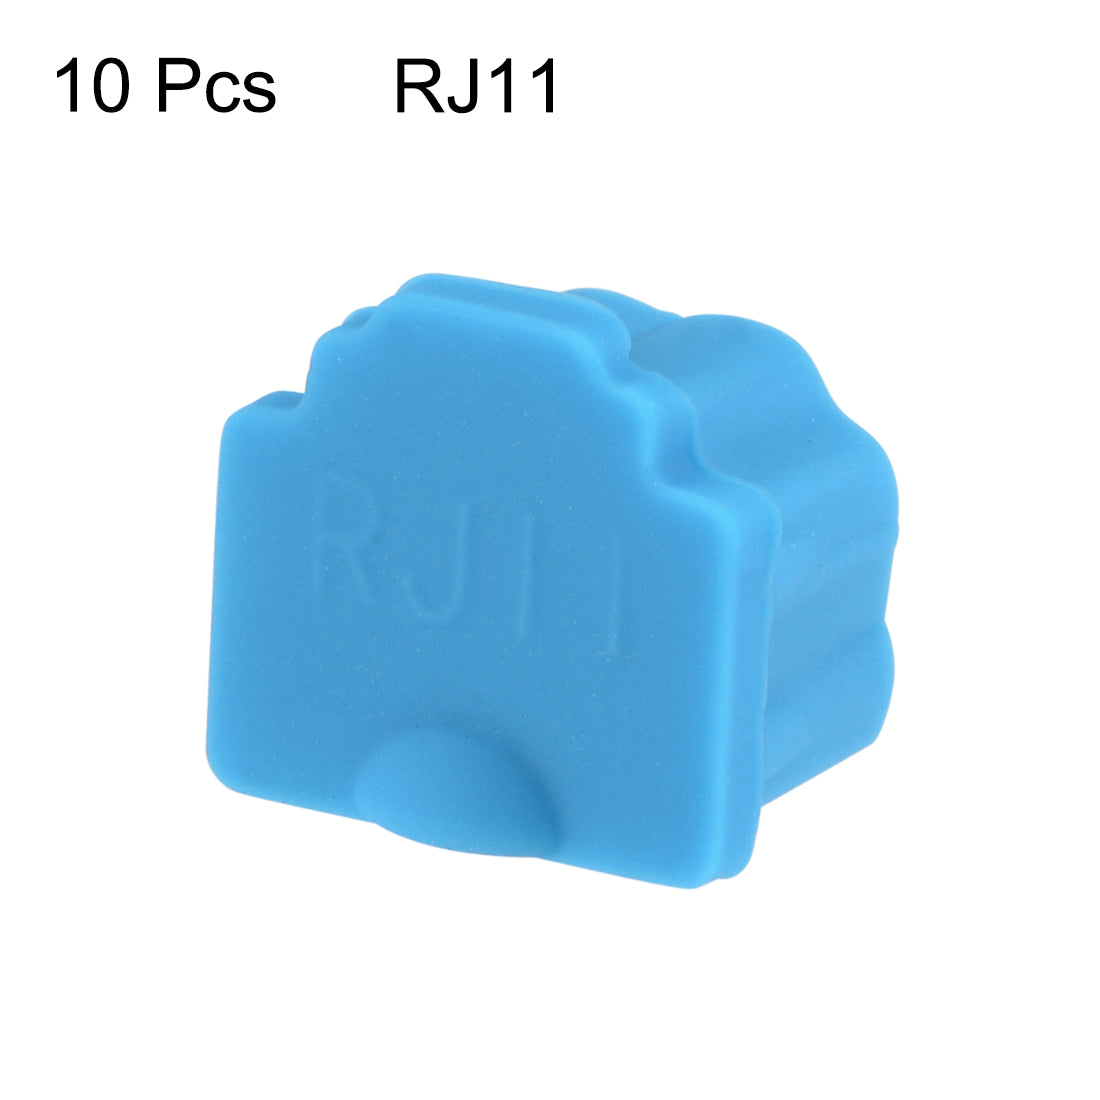 uxcell Uxcell 10pcs RJ11 Silicone Protector Telephone Modular Port Anti Dust Cap Cover, Blue